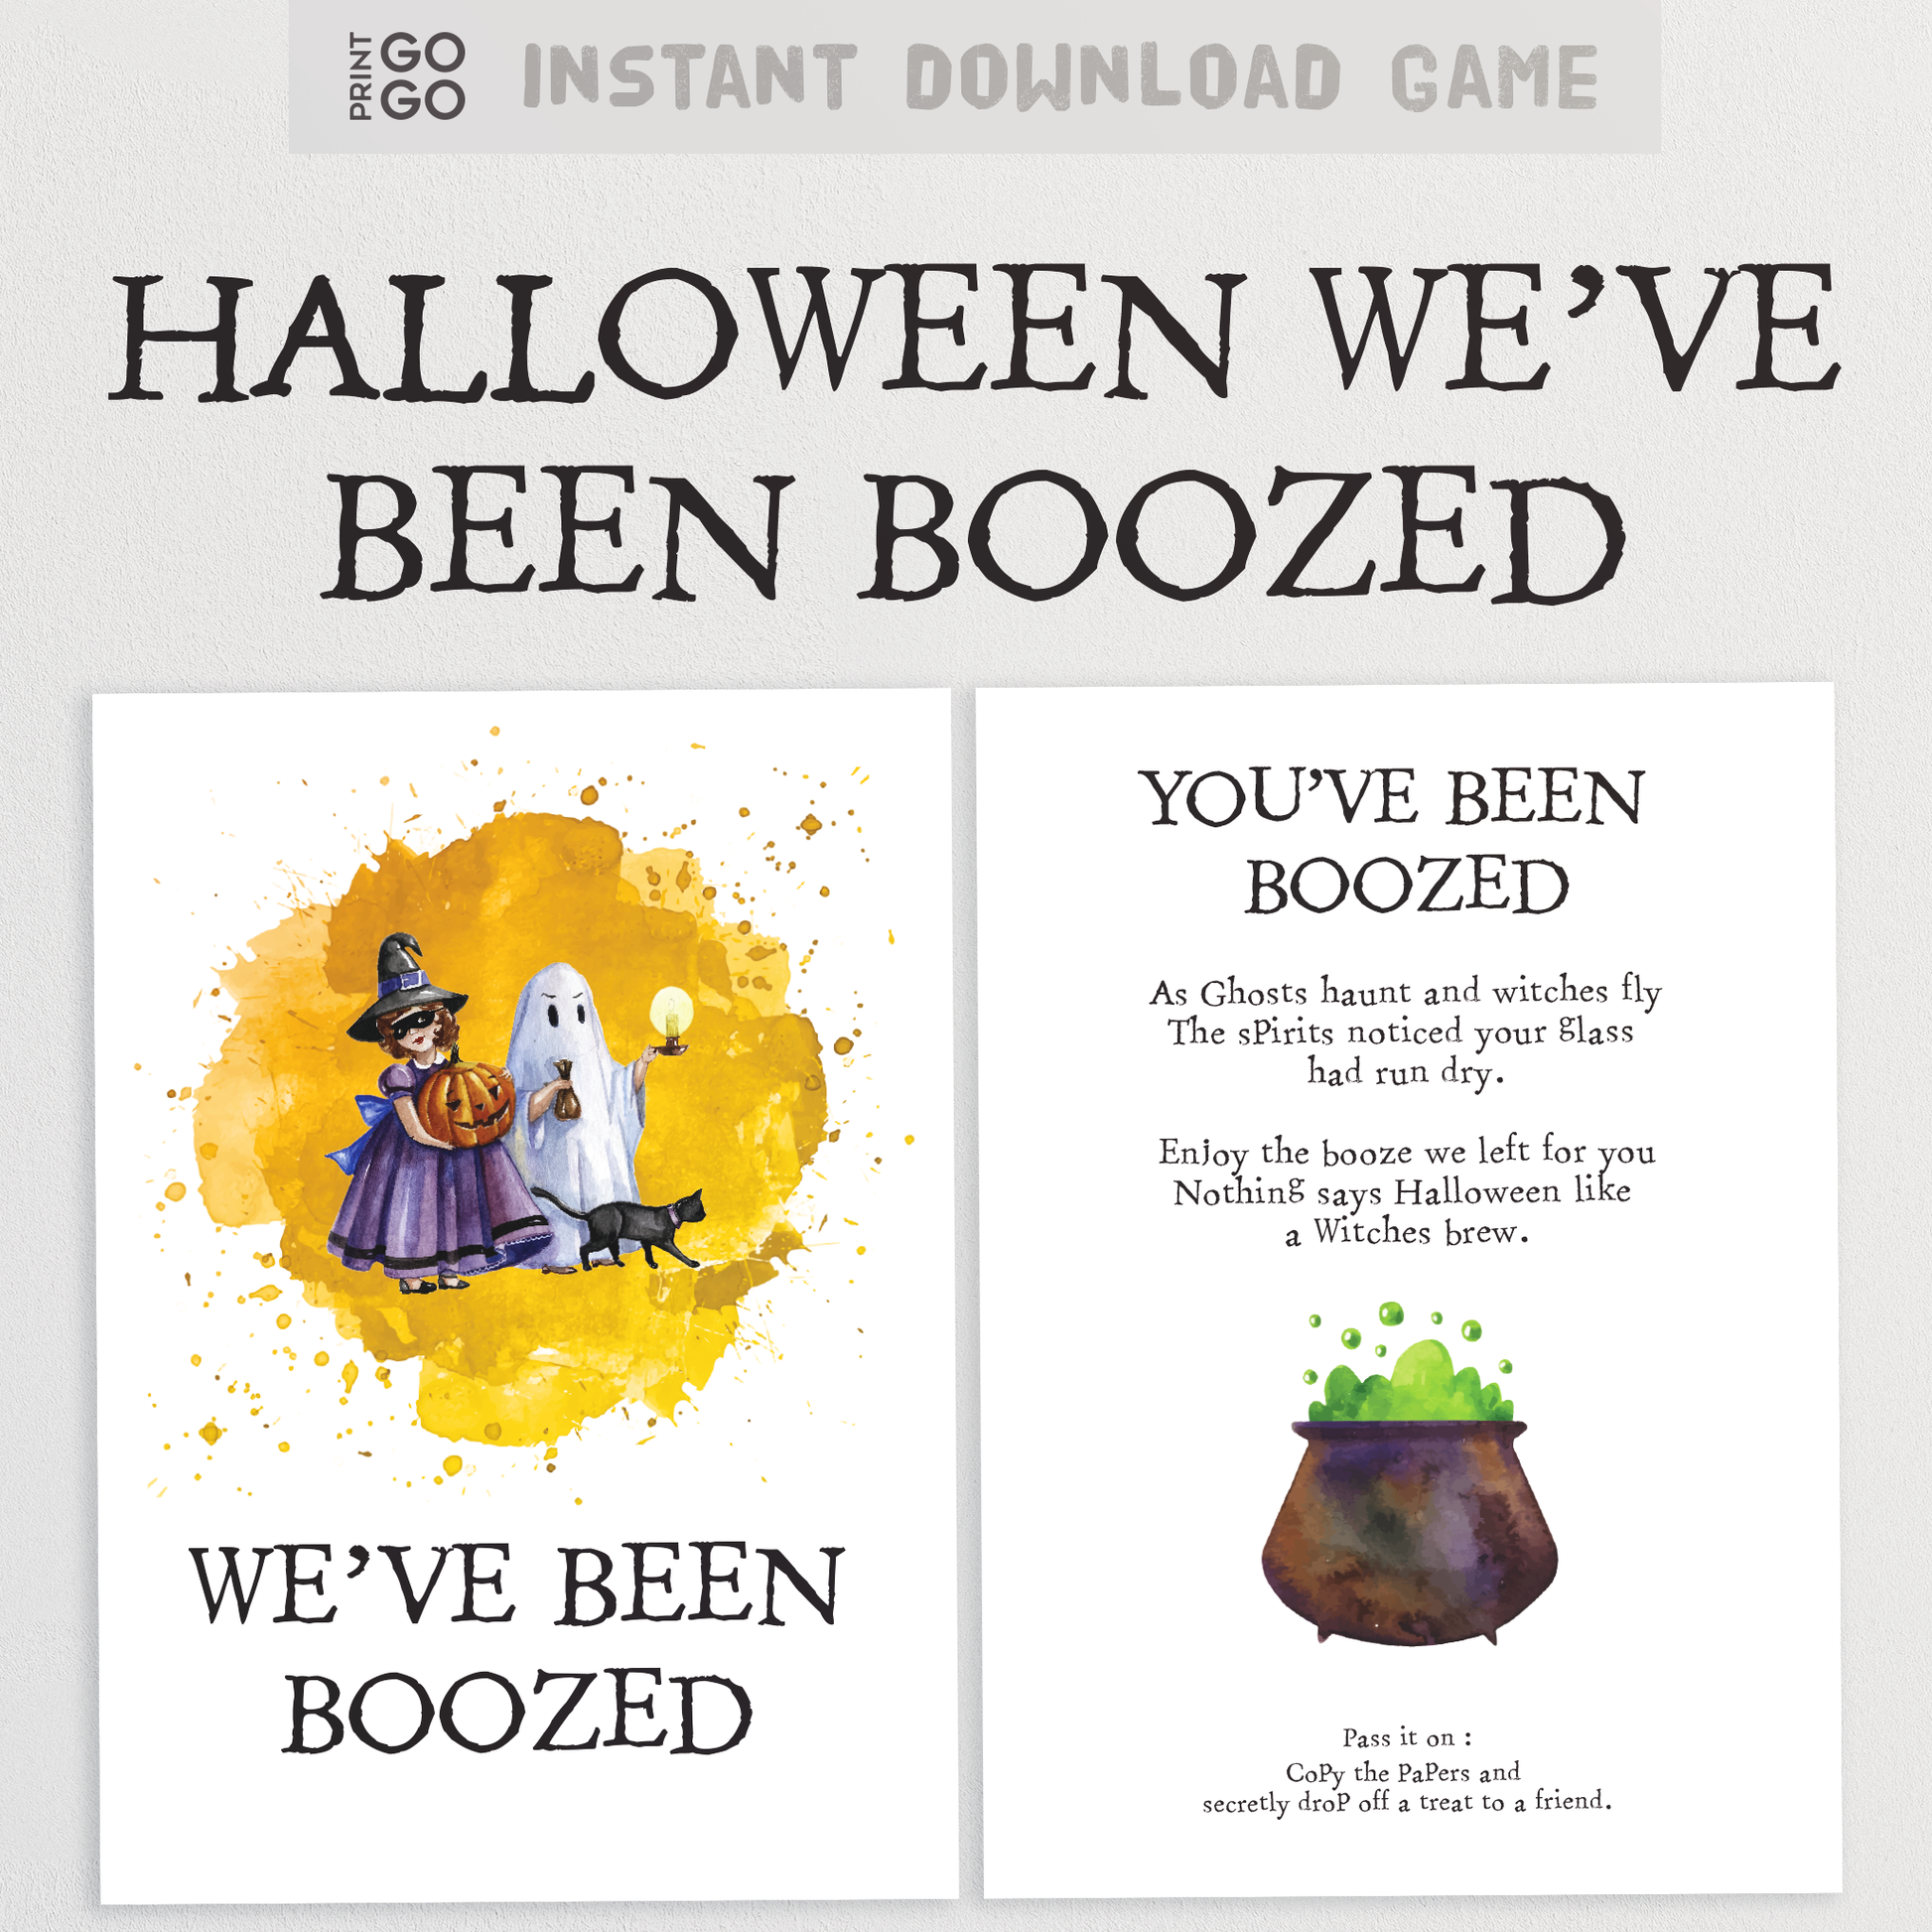 Halloween You've Been Boozed! Game for Adults